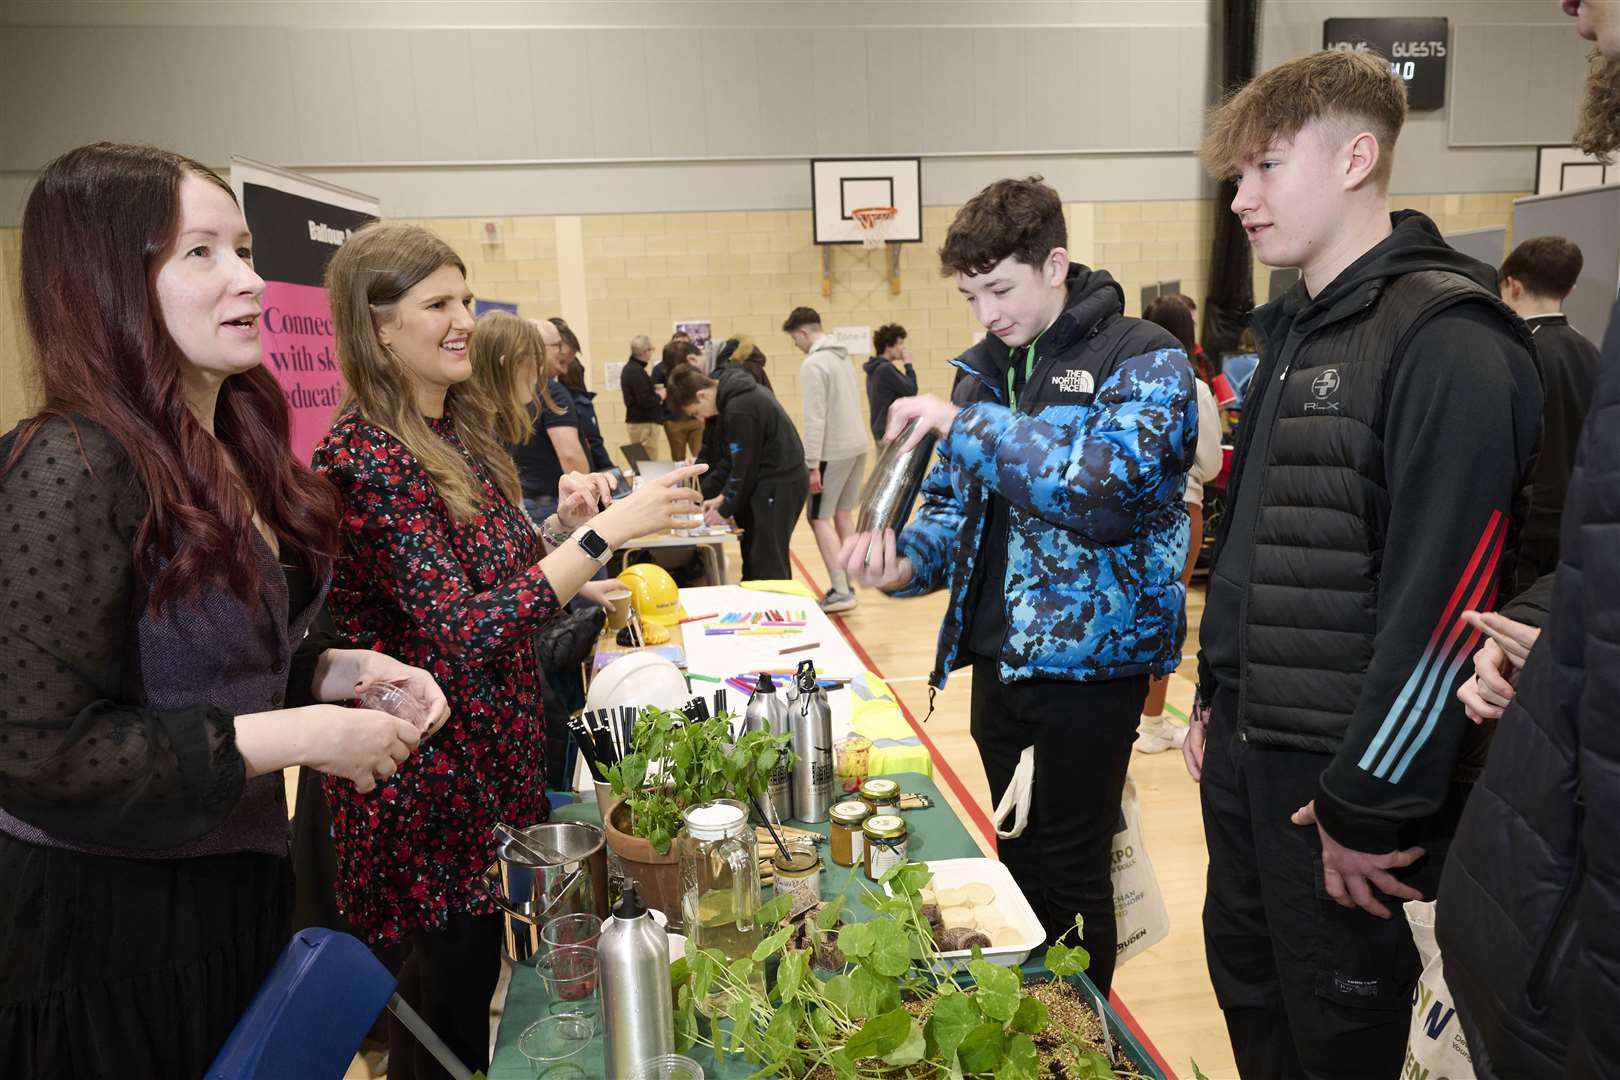 The Green Careers Expo at Alness Academy was a chance for young people to find out about a diverse range of career and training options.